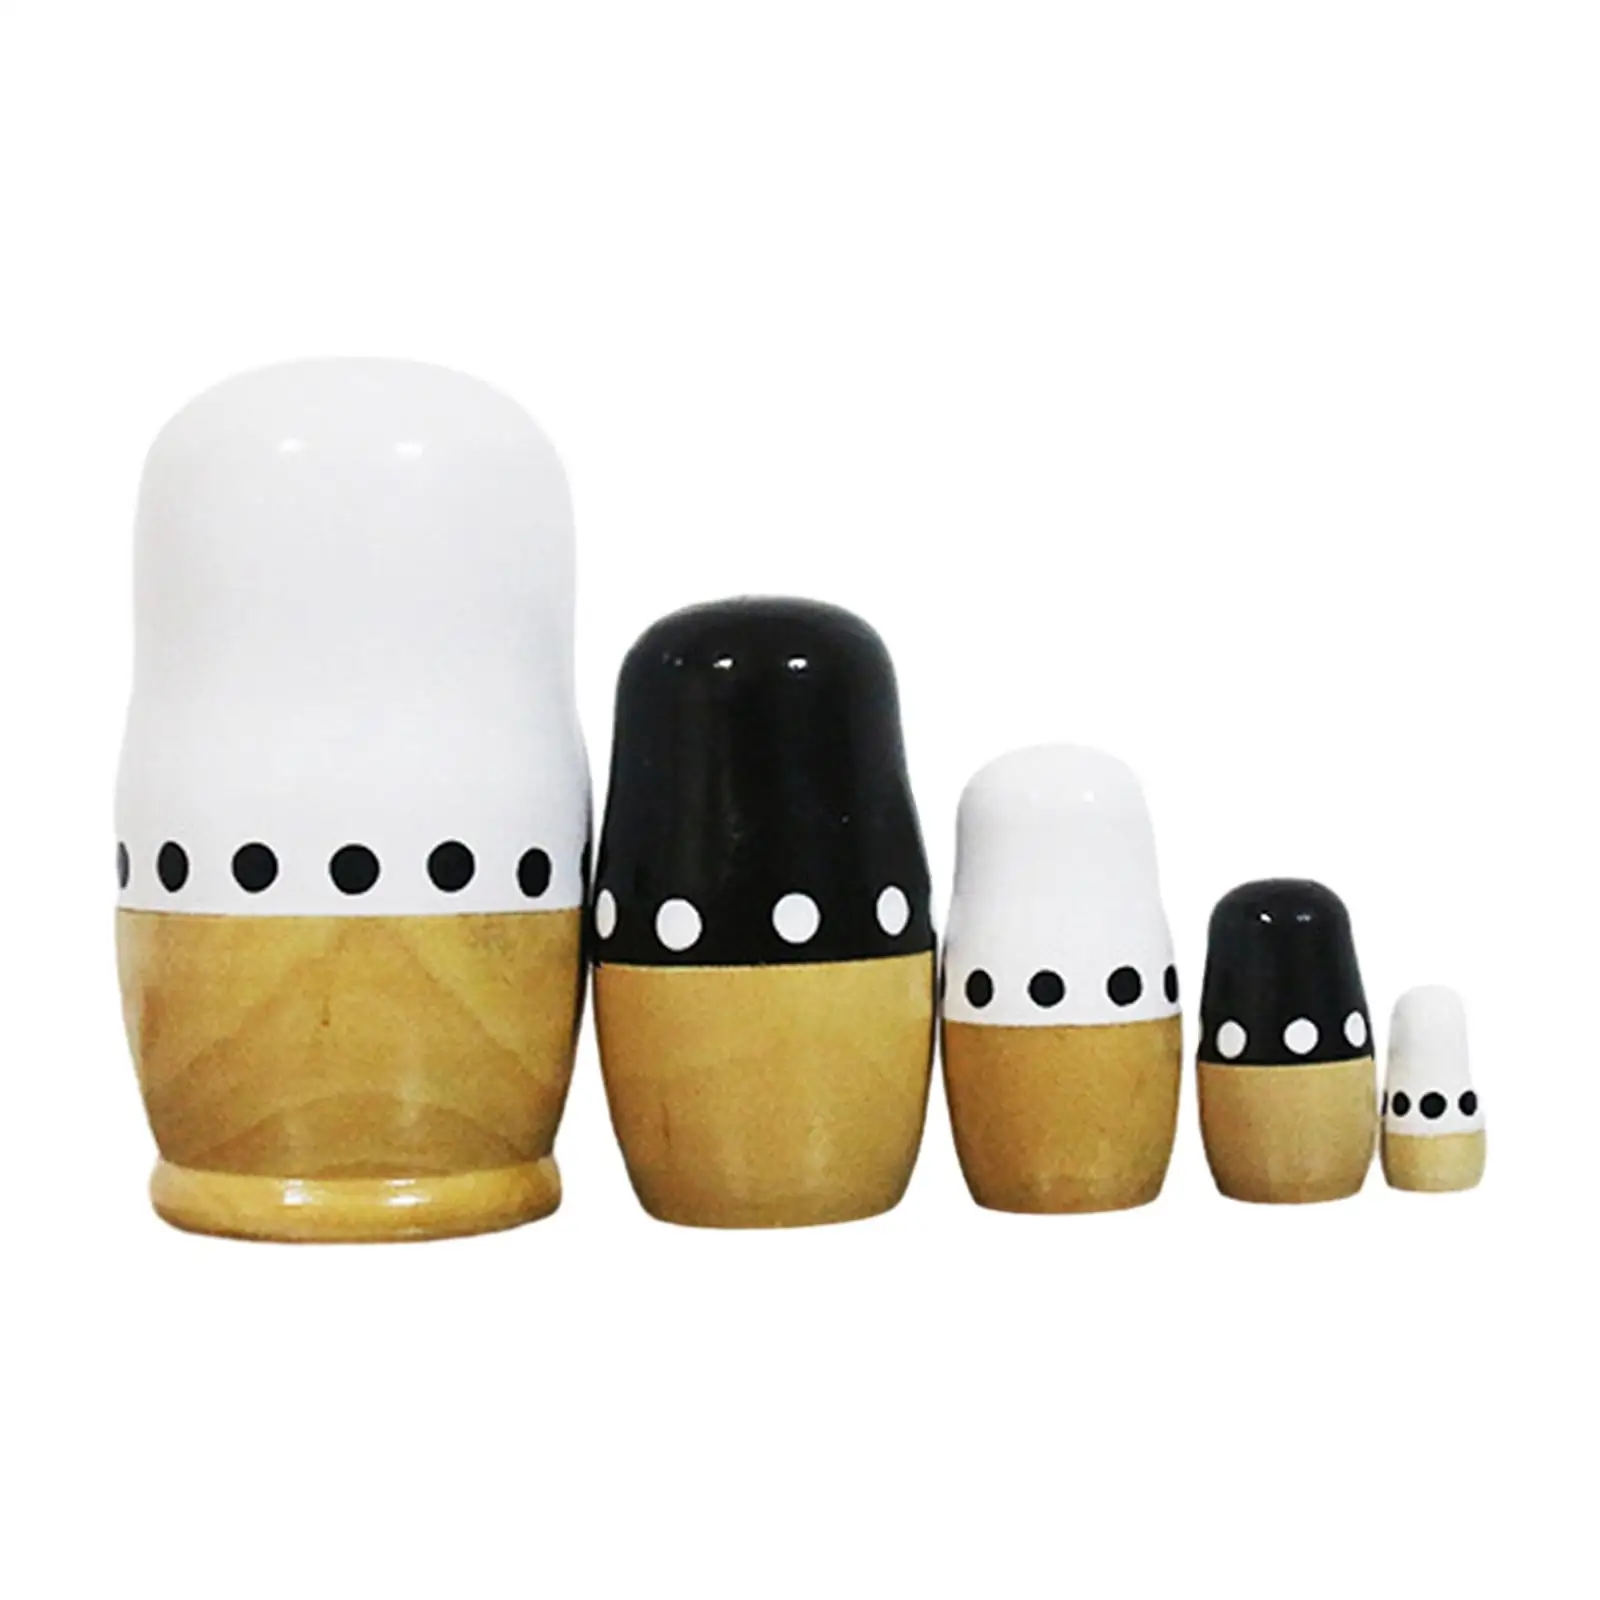 5 Pieces Russian Dolls Simple Matryoshka Crafts for Home Birthday Halloween